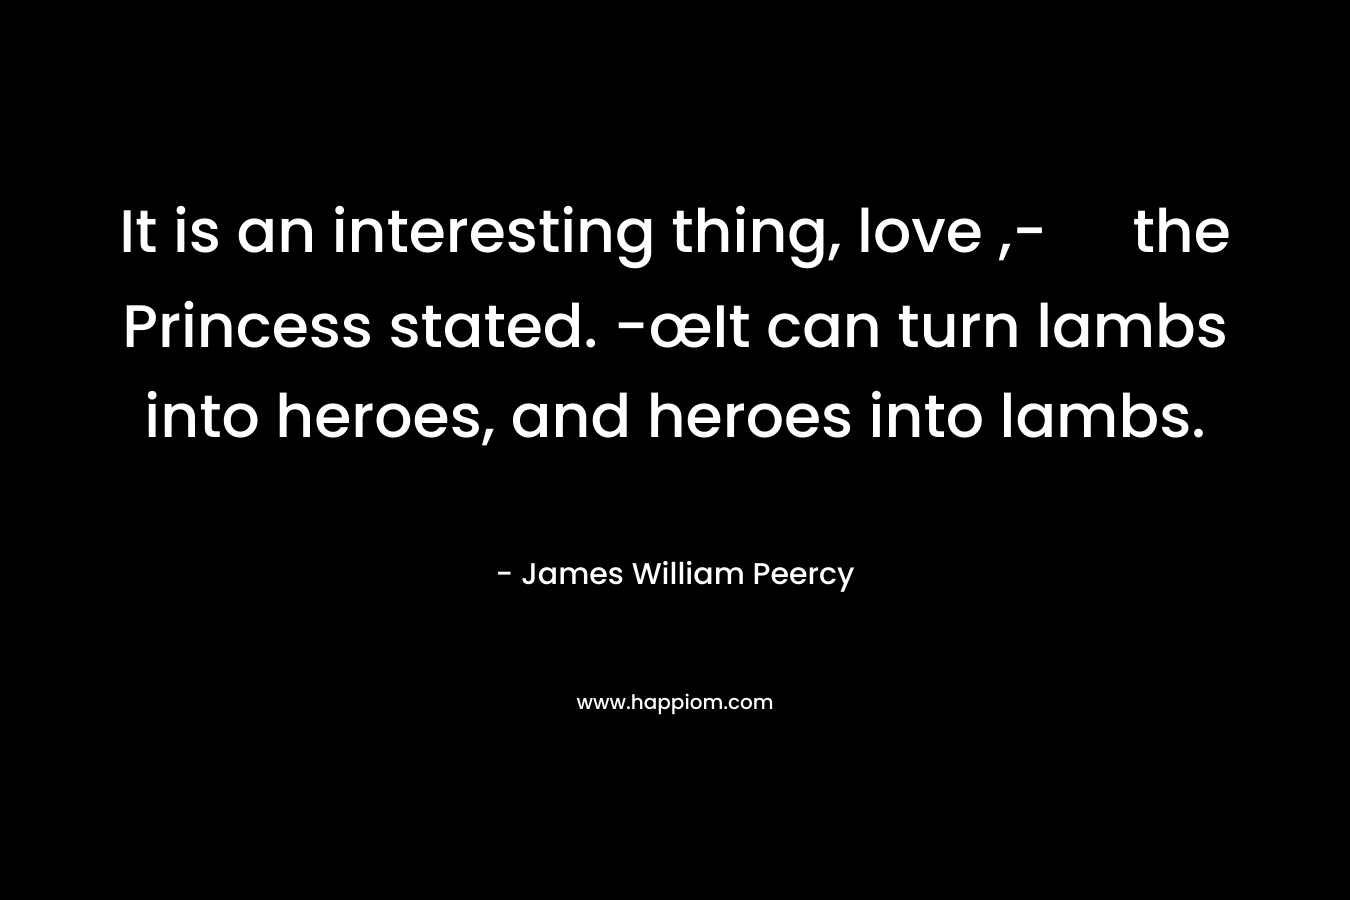 It is an interesting thing, love ,- the Princess stated. -œIt can turn lambs into heroes, and heroes into lambs. – James William Peercy